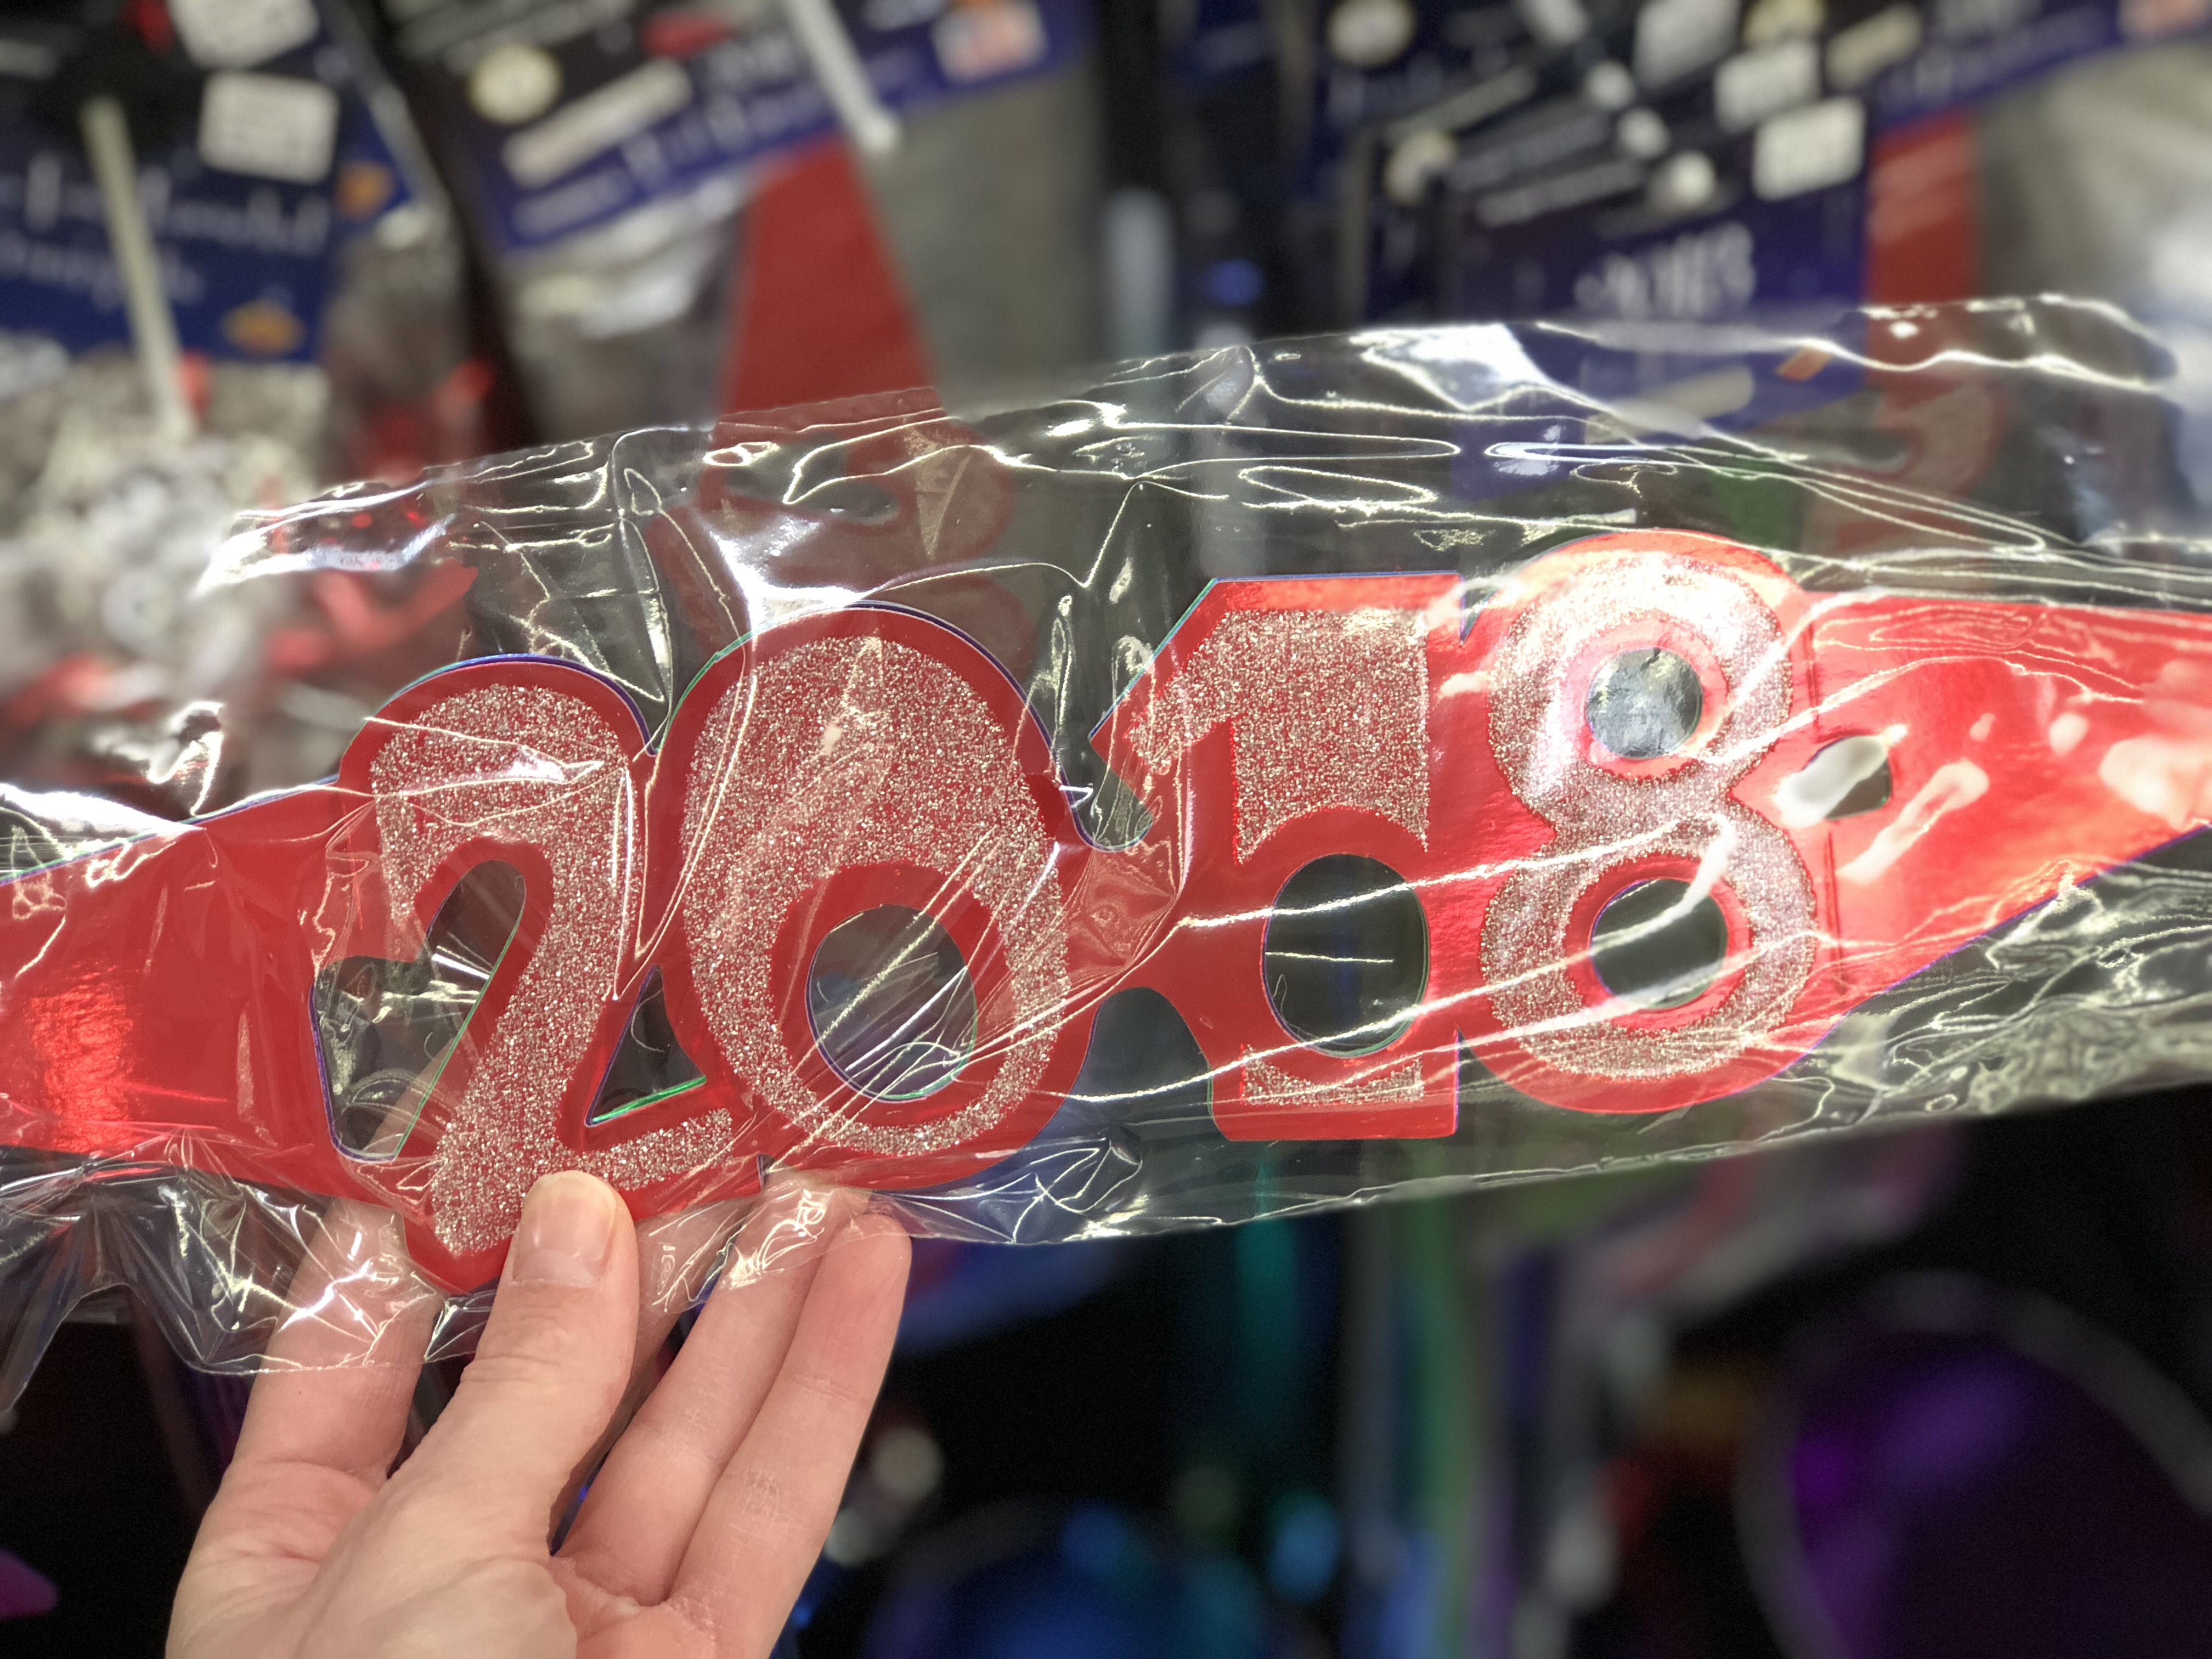 New Year's Eve Party Supplies Just 2.58 at Walmart